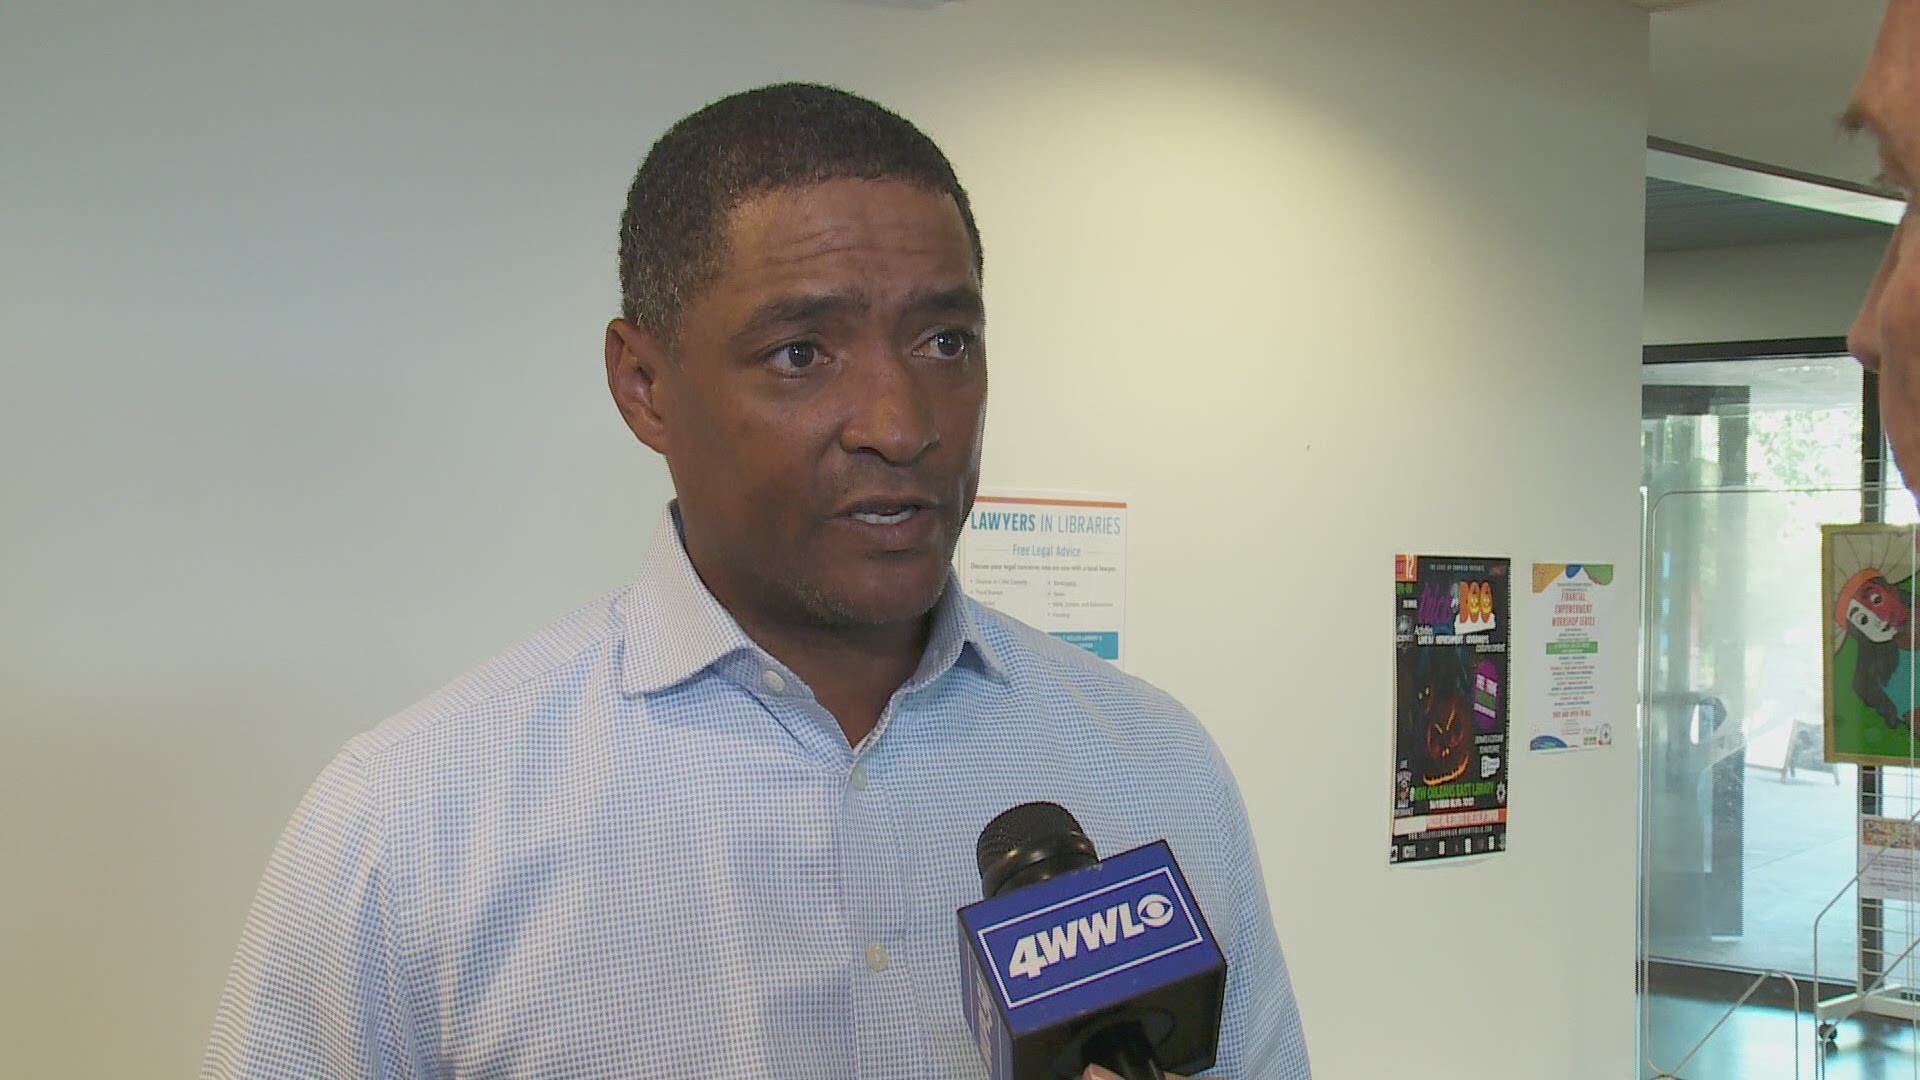 U.S. Congressman Cedric Richmond of Louisiana said he would have preferred the controversy over a pre-game chant from the St. Augustine High School football team.